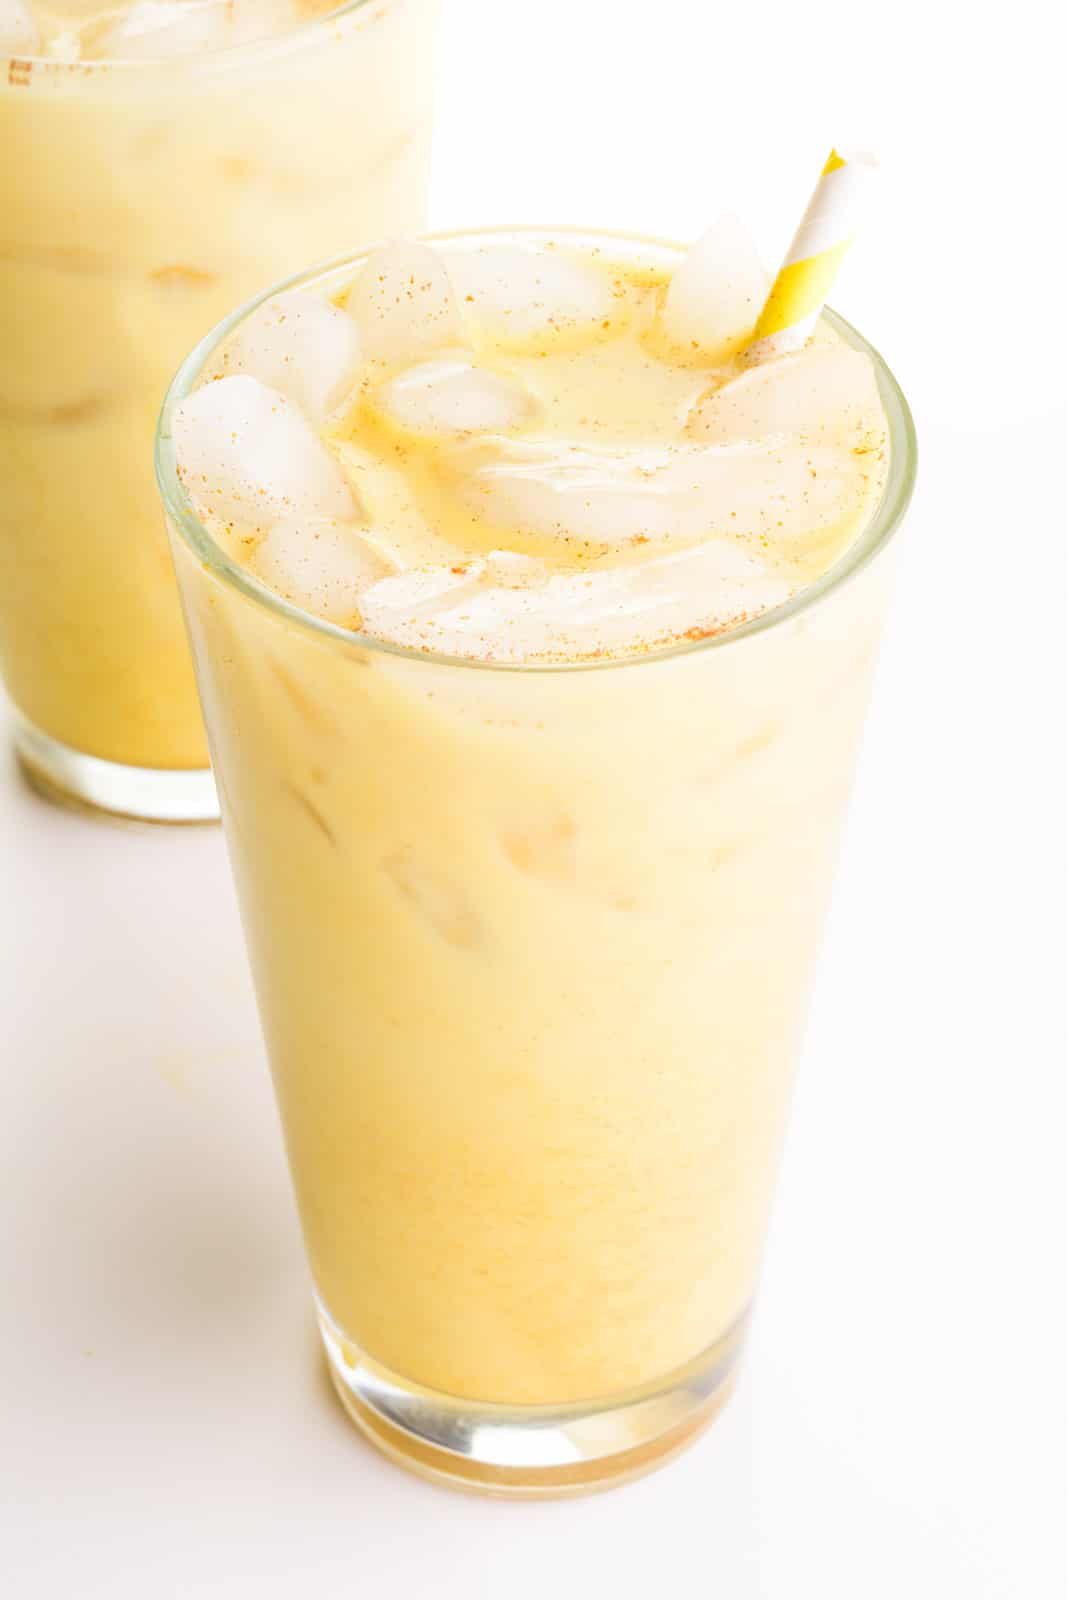 Two glasses, each full of golden milk latte, are sitting one in front of the other. There is a yellow straw in both glasses.